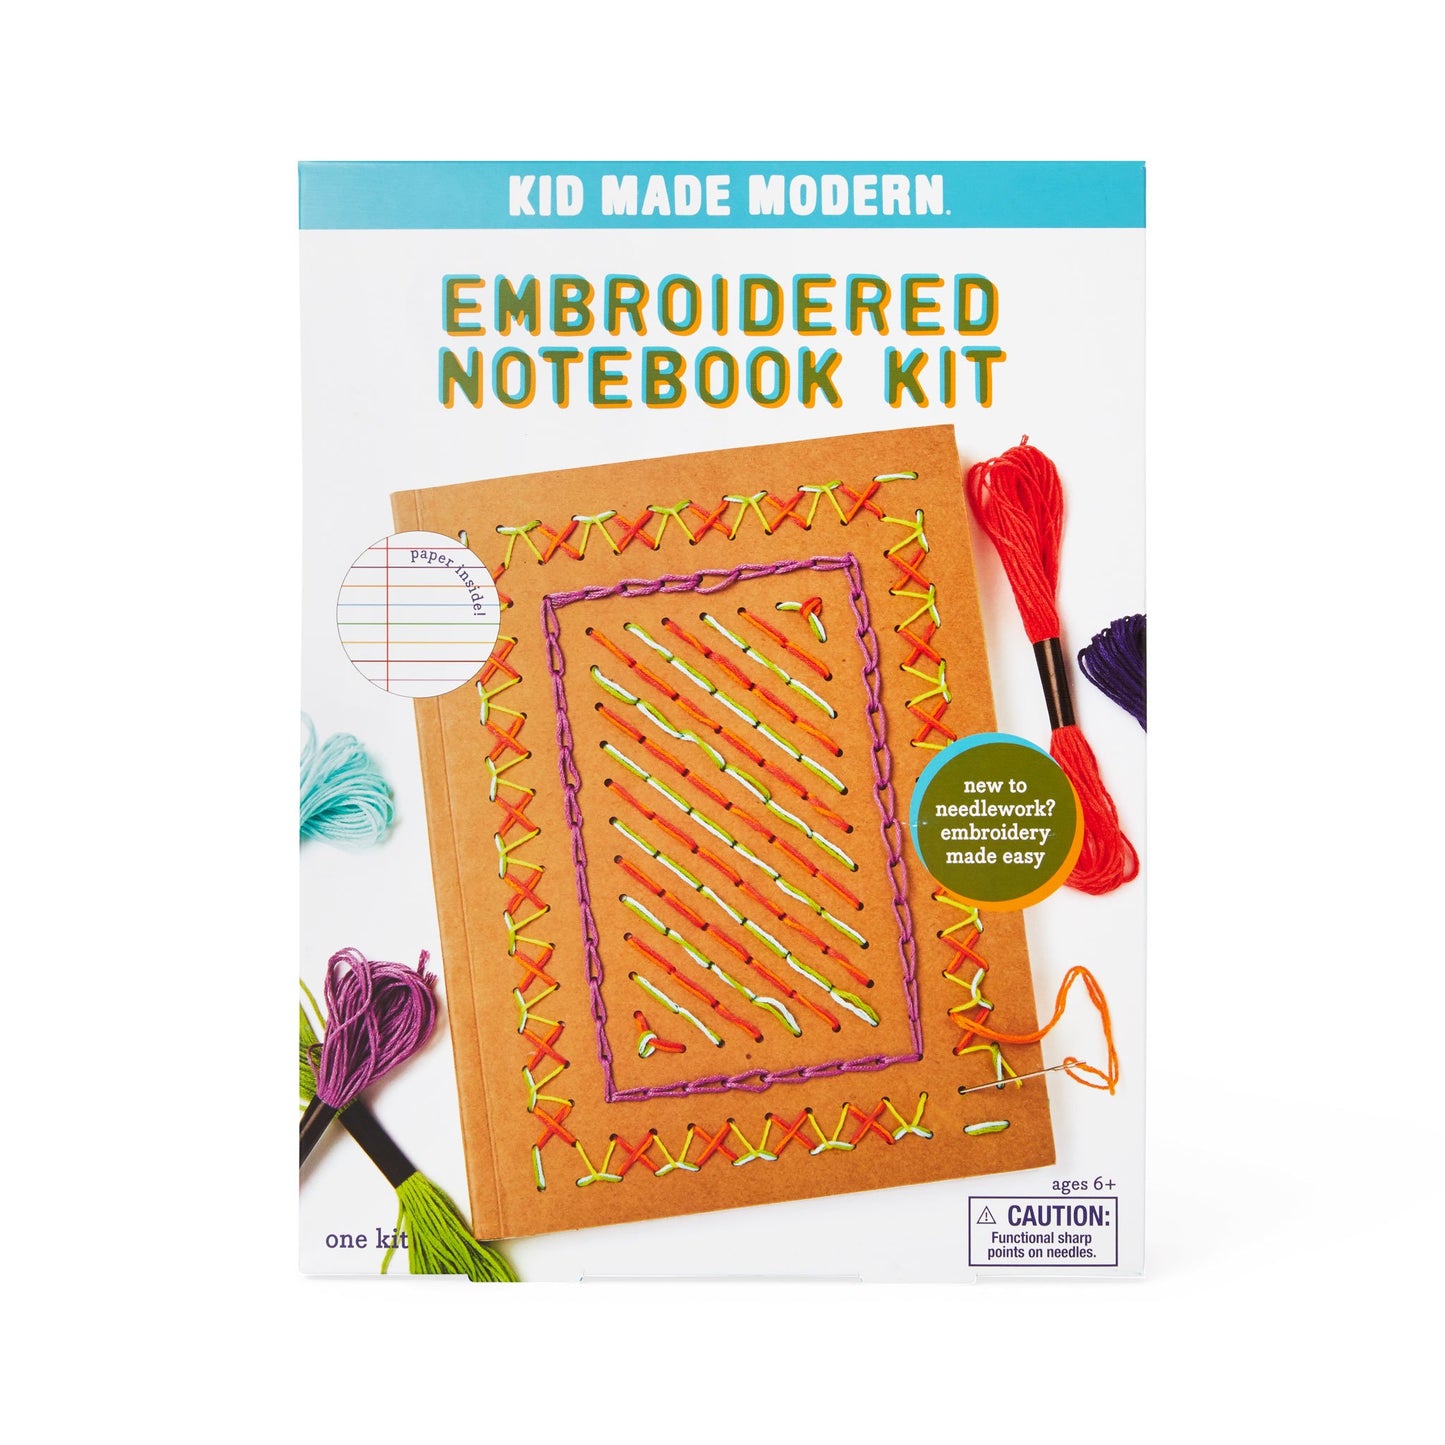 Embroidered Notebook Kit